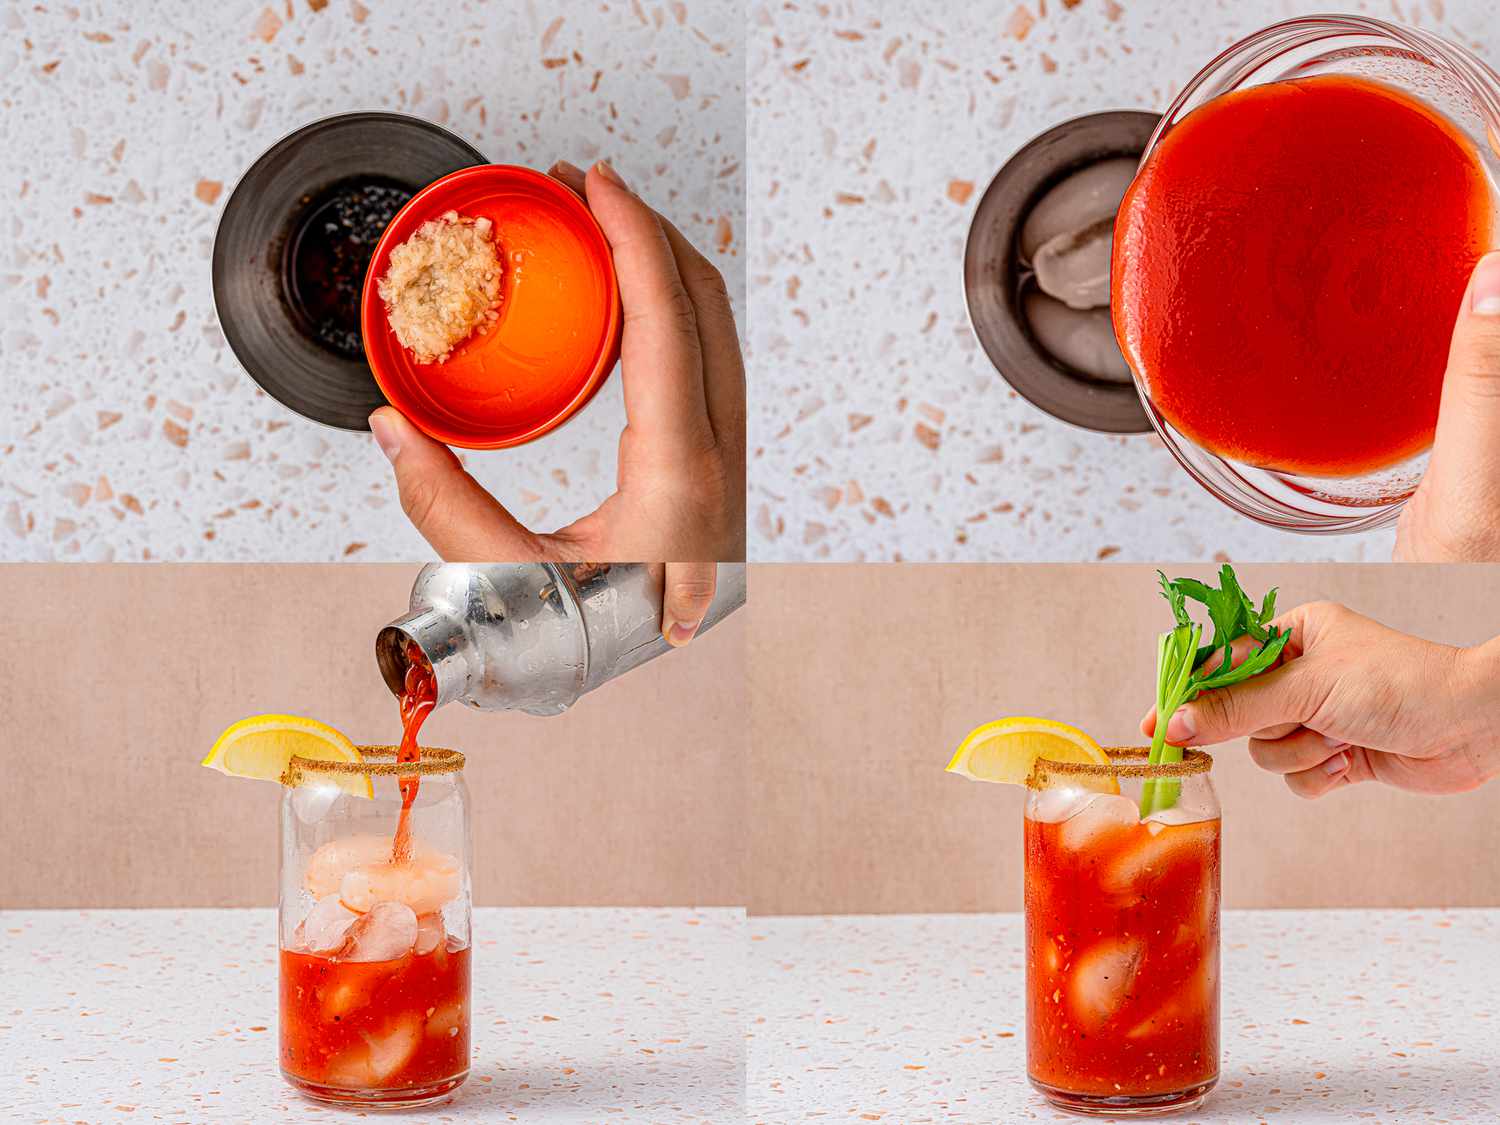 Four image collage of adding horseradish and tomato juice to s shaker, pouring shaker into a glass and garnishing with a piece of celery